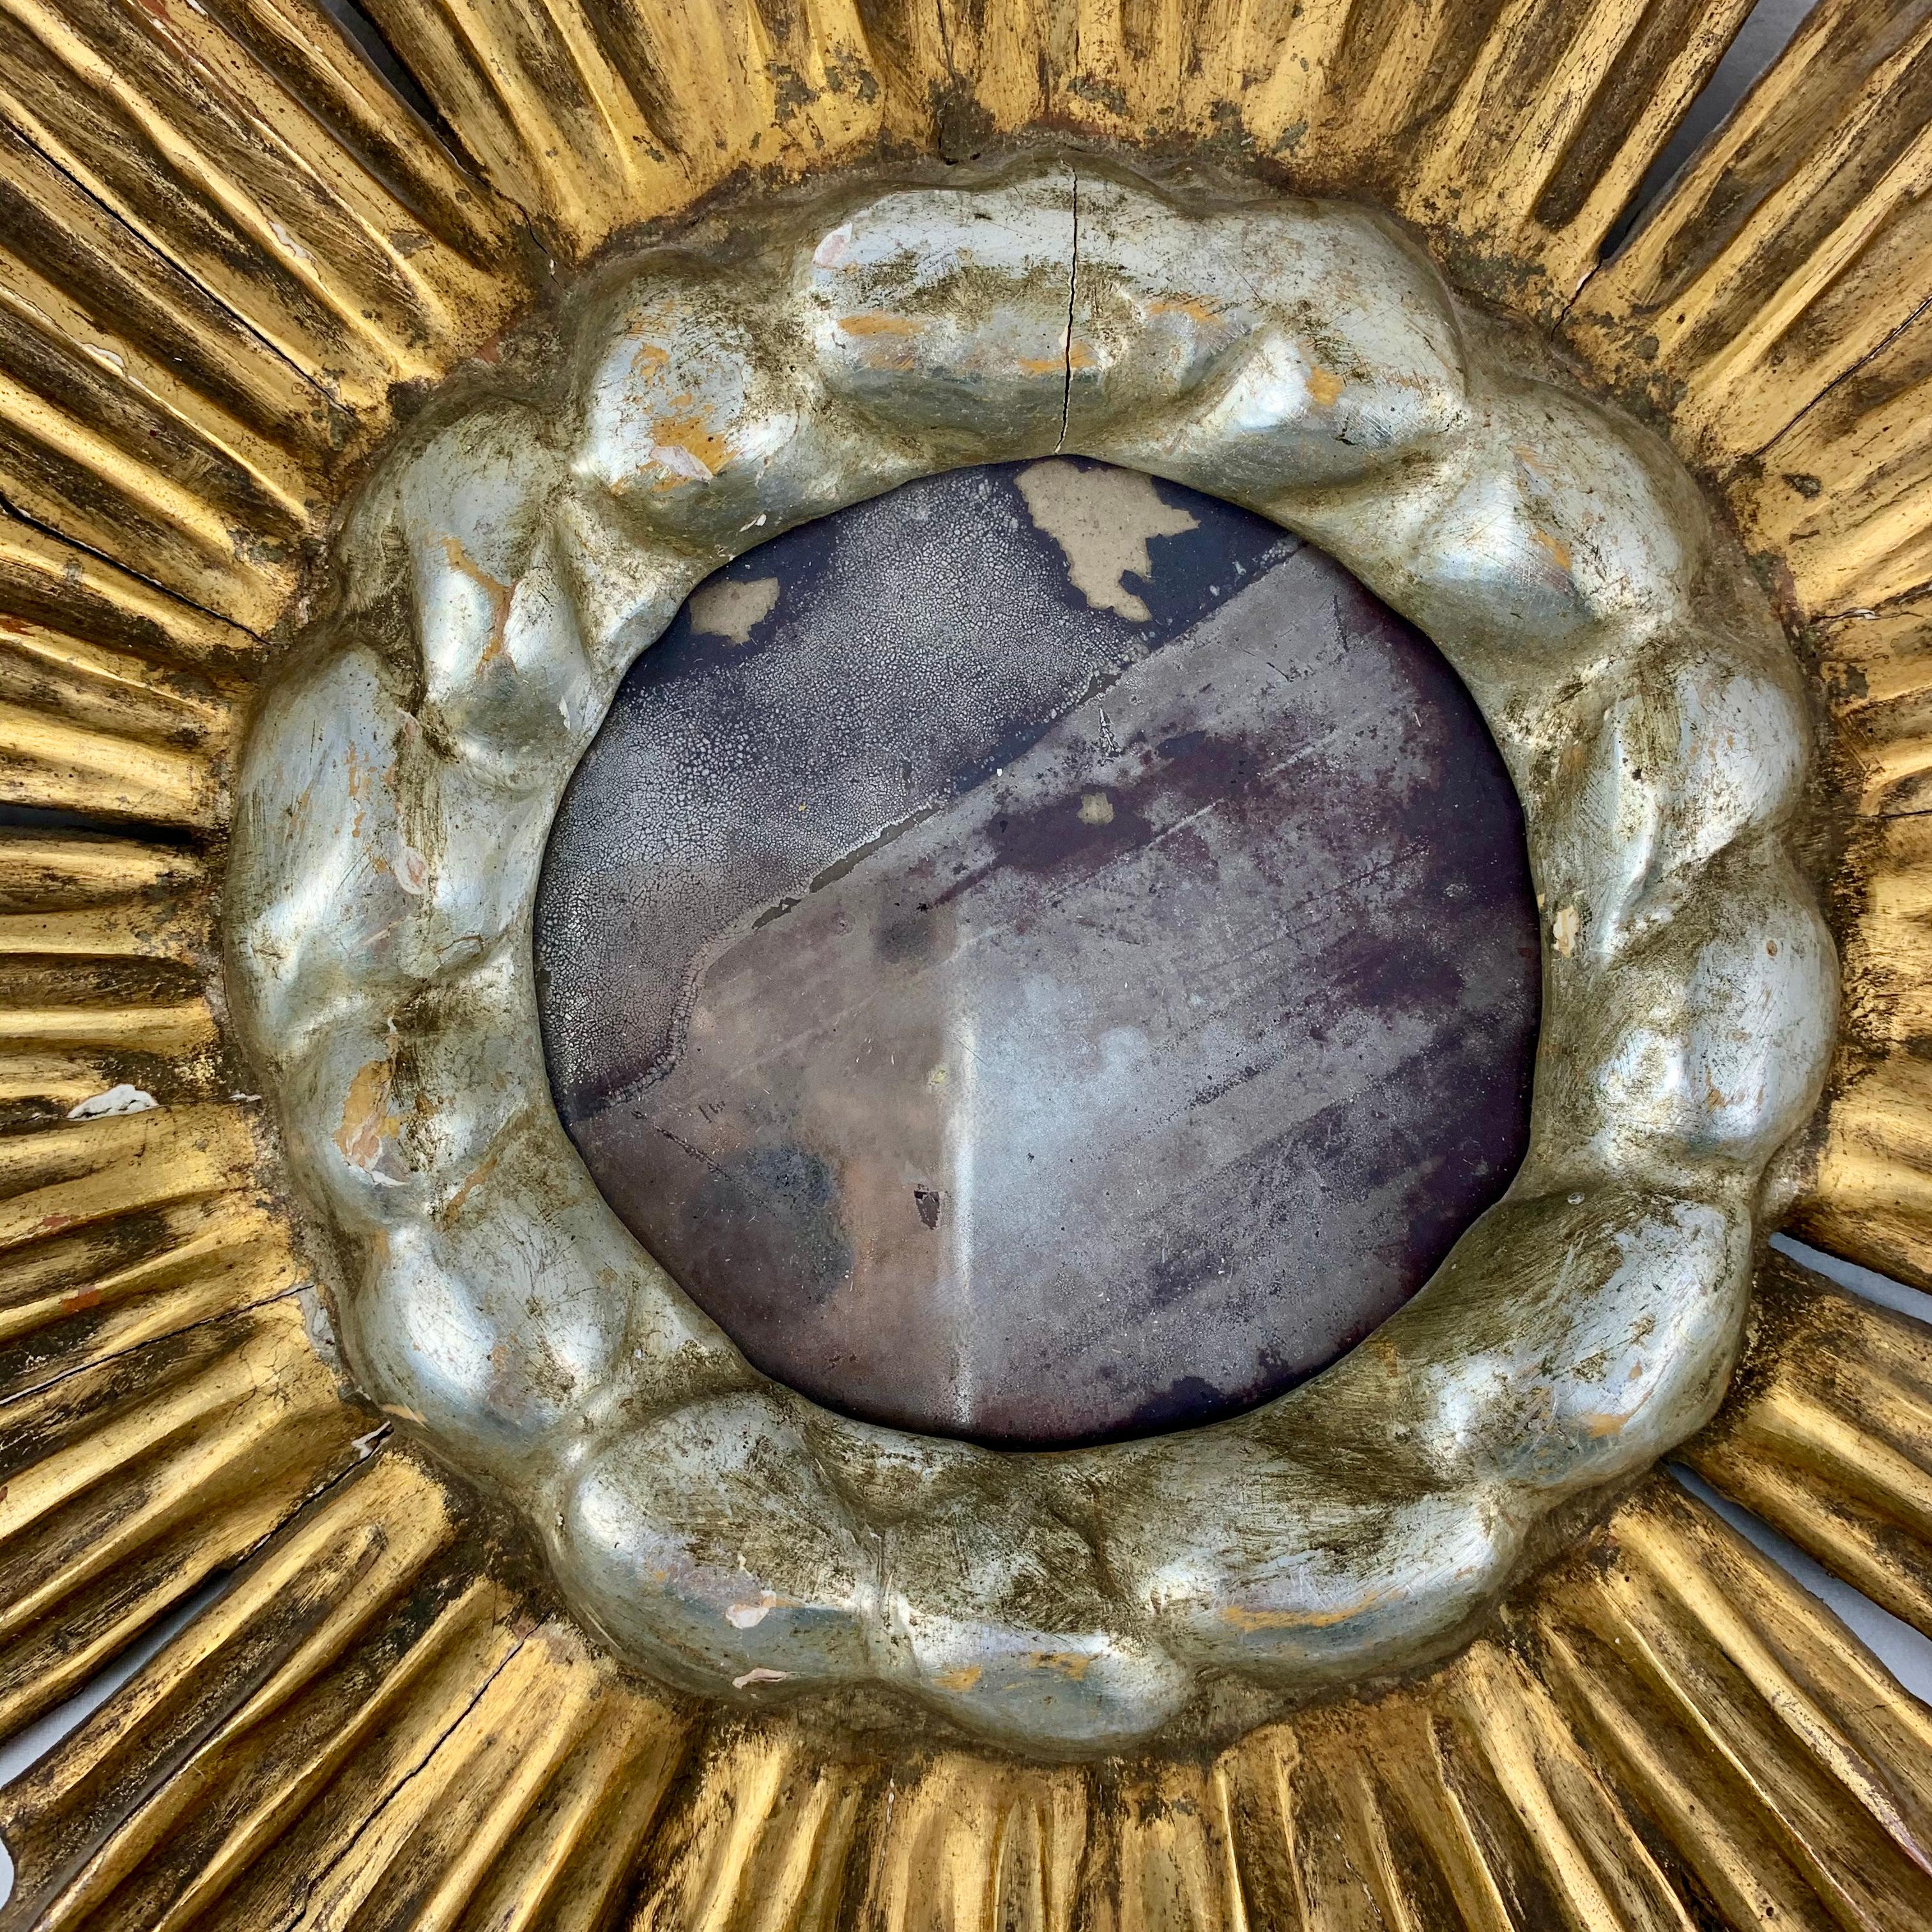 A Hollywood Regency Period wall mirror, showing a giltwood sunburst with a cloud bezel, from France, circa 1920s.

Made of gilded and silvered gesso on wood, the mirror is set in a bezel resembling clouds painted in a soft silvery gold. The gilded